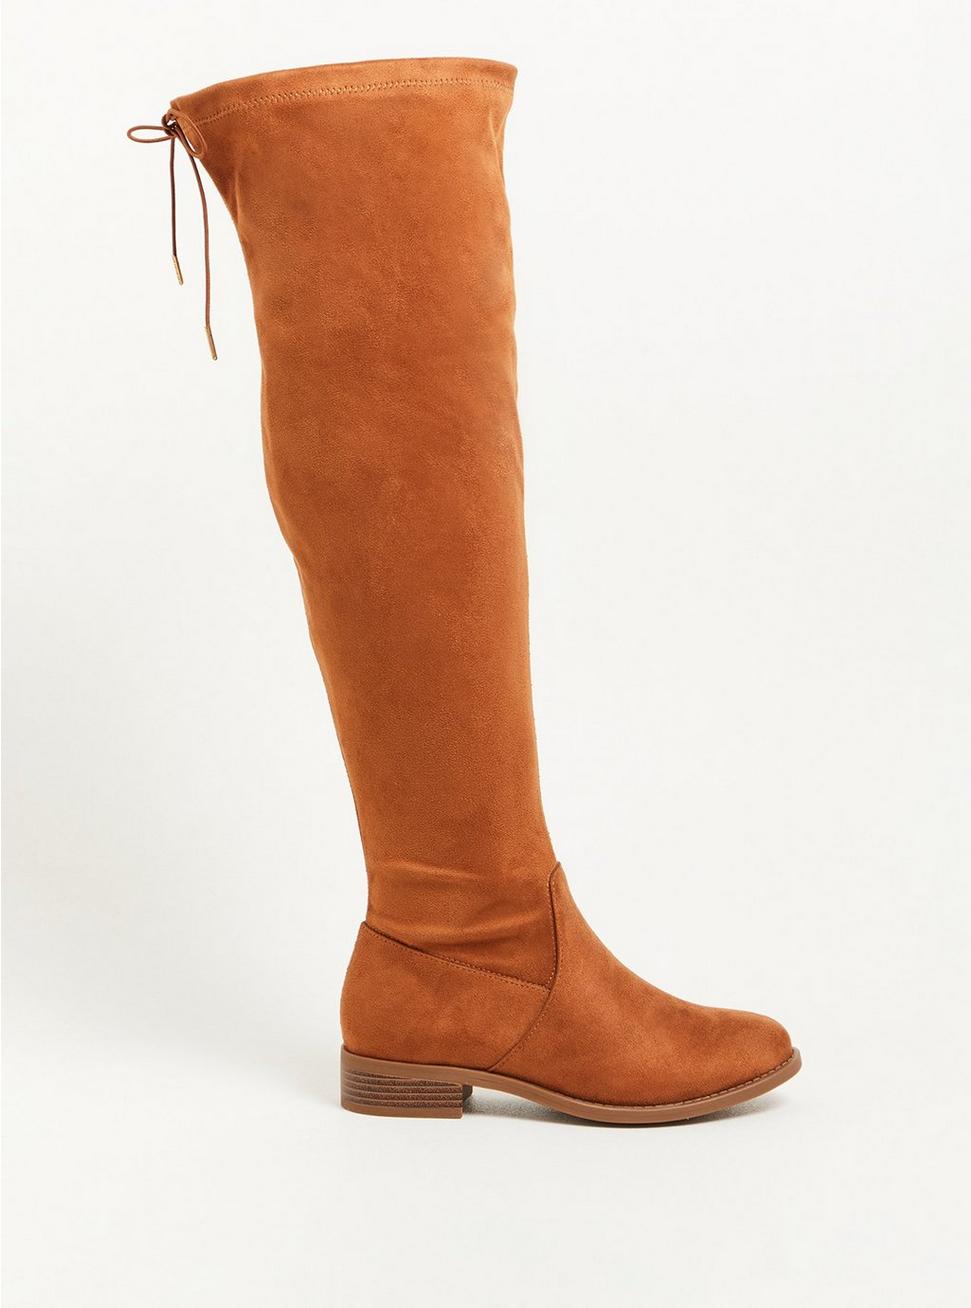 Stretch Flat Over The Knee Boot (WW), CAMEL, alternate